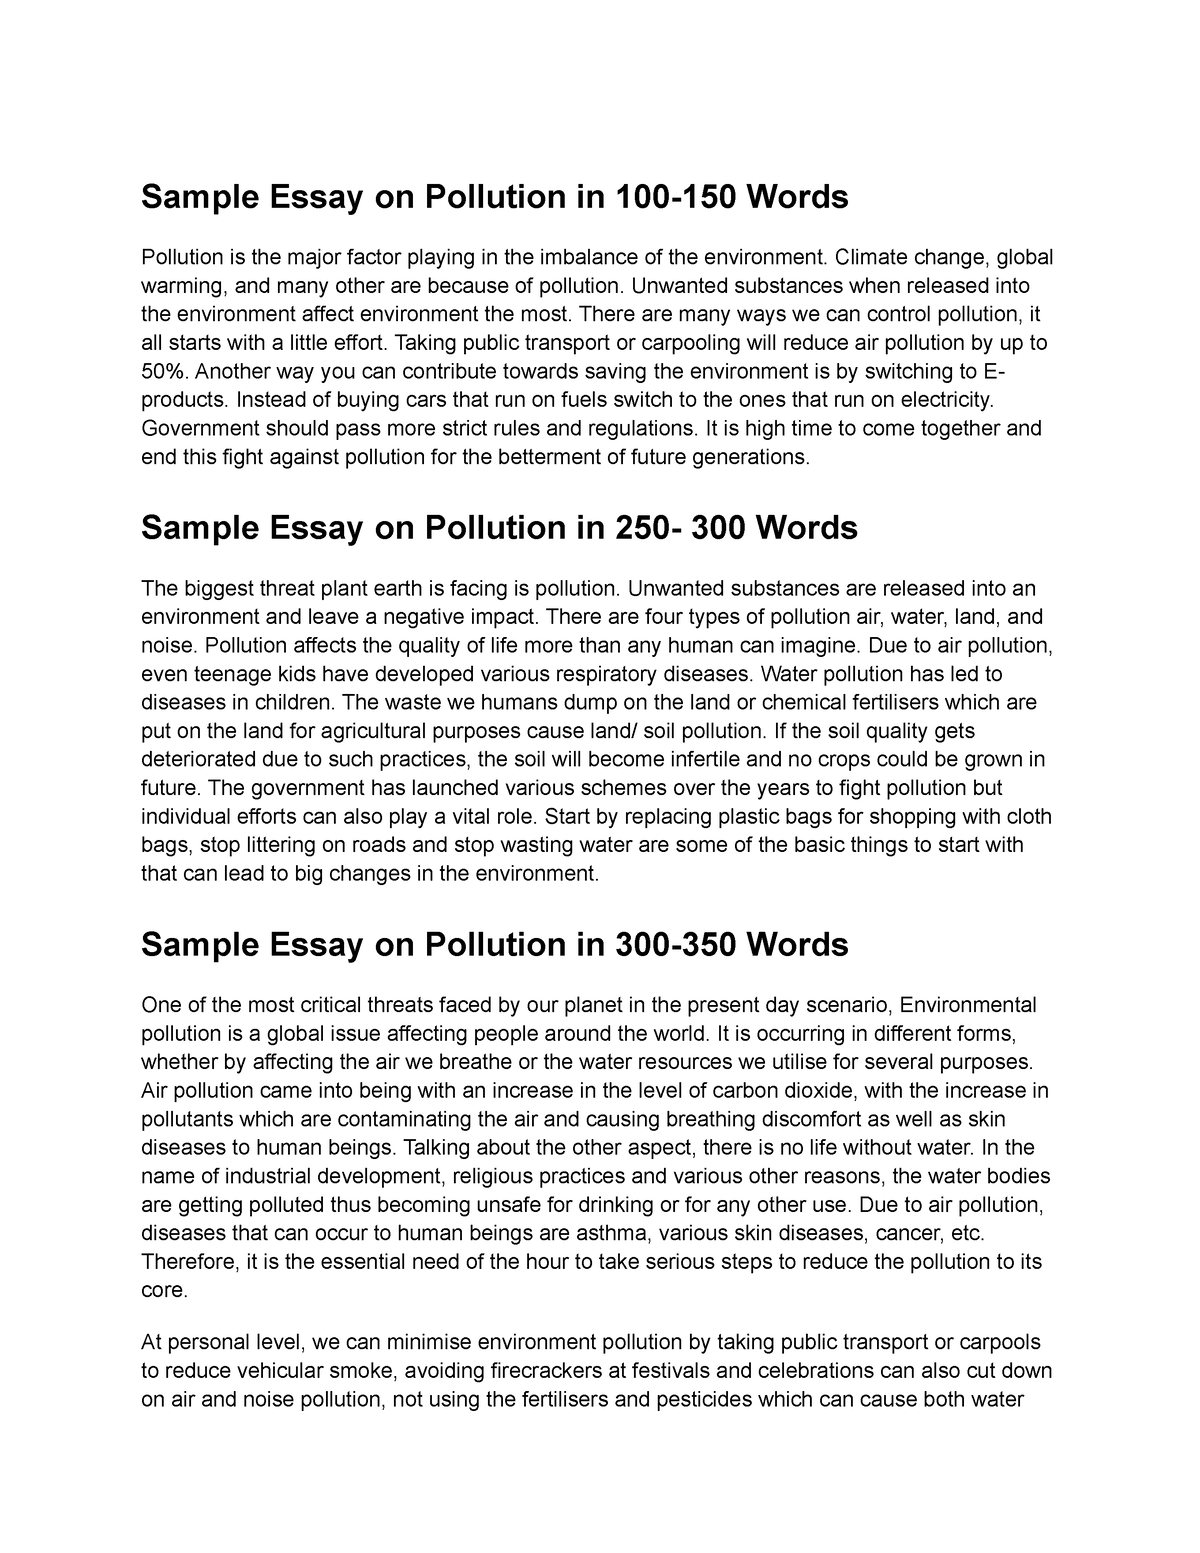 write an essay on pollution in 100 words